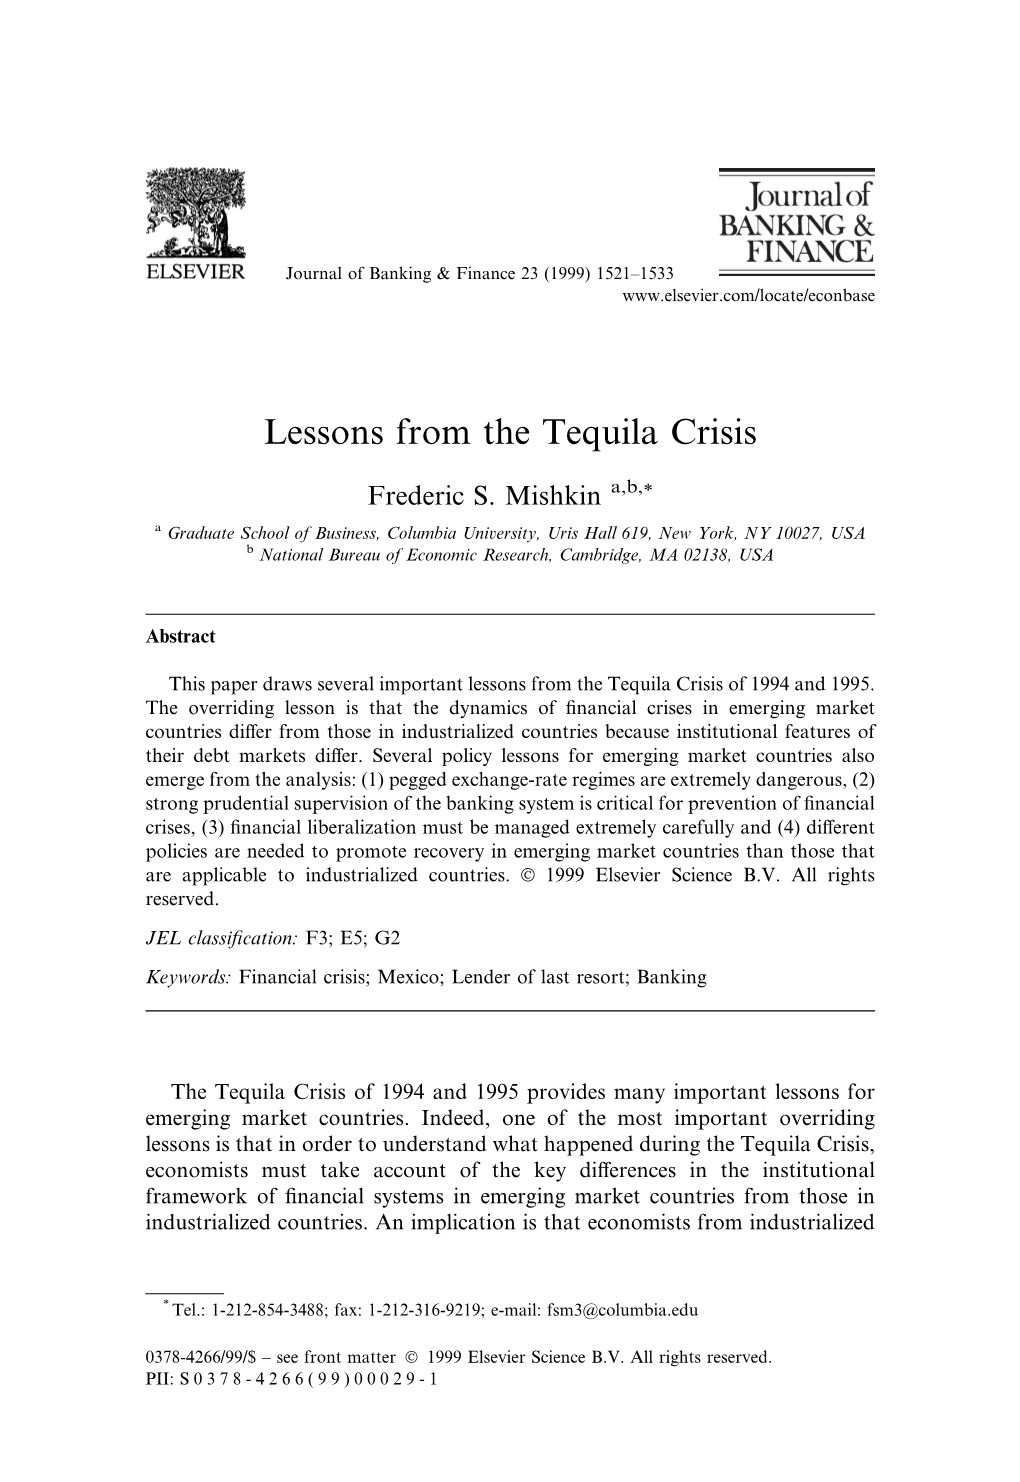 Lessons from the Tequila Crisis